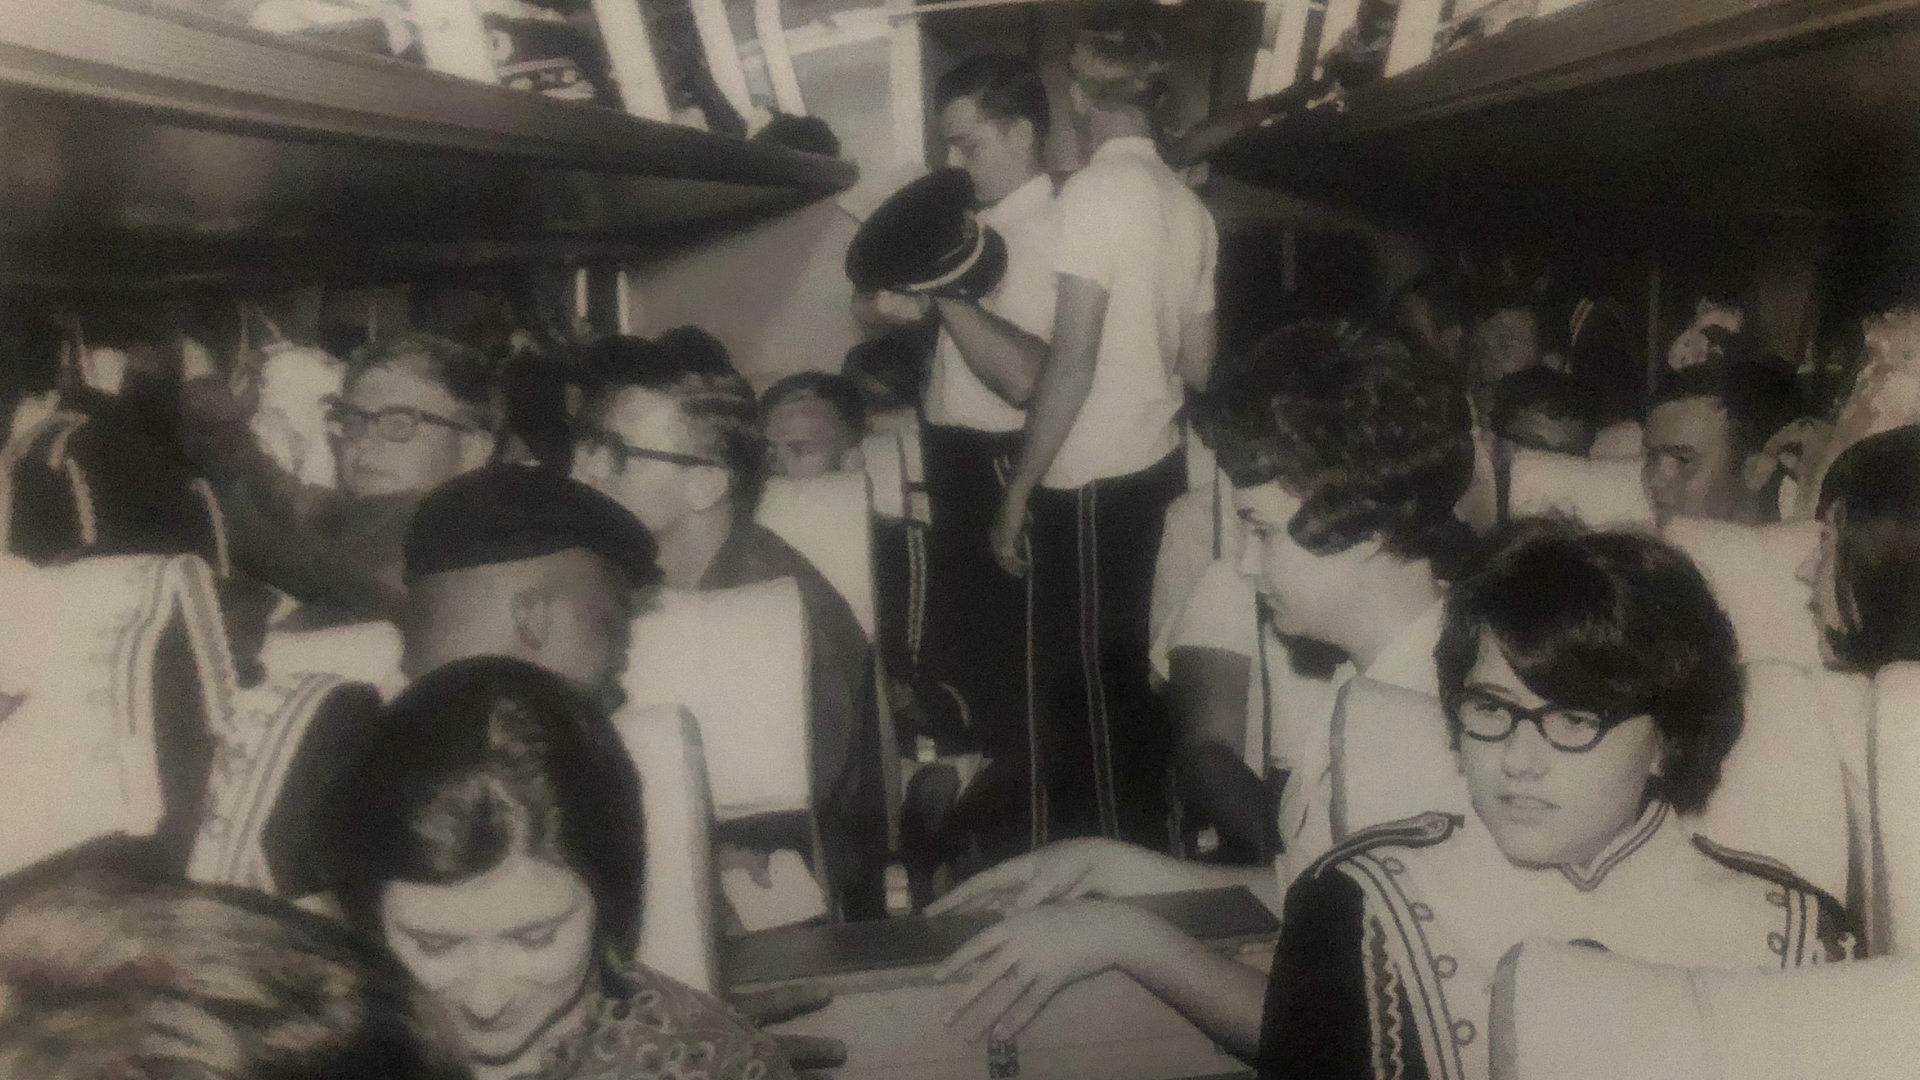 Candid photo of marching band students on a bus with their uniforms on.  The photo is from the mid-1900s.